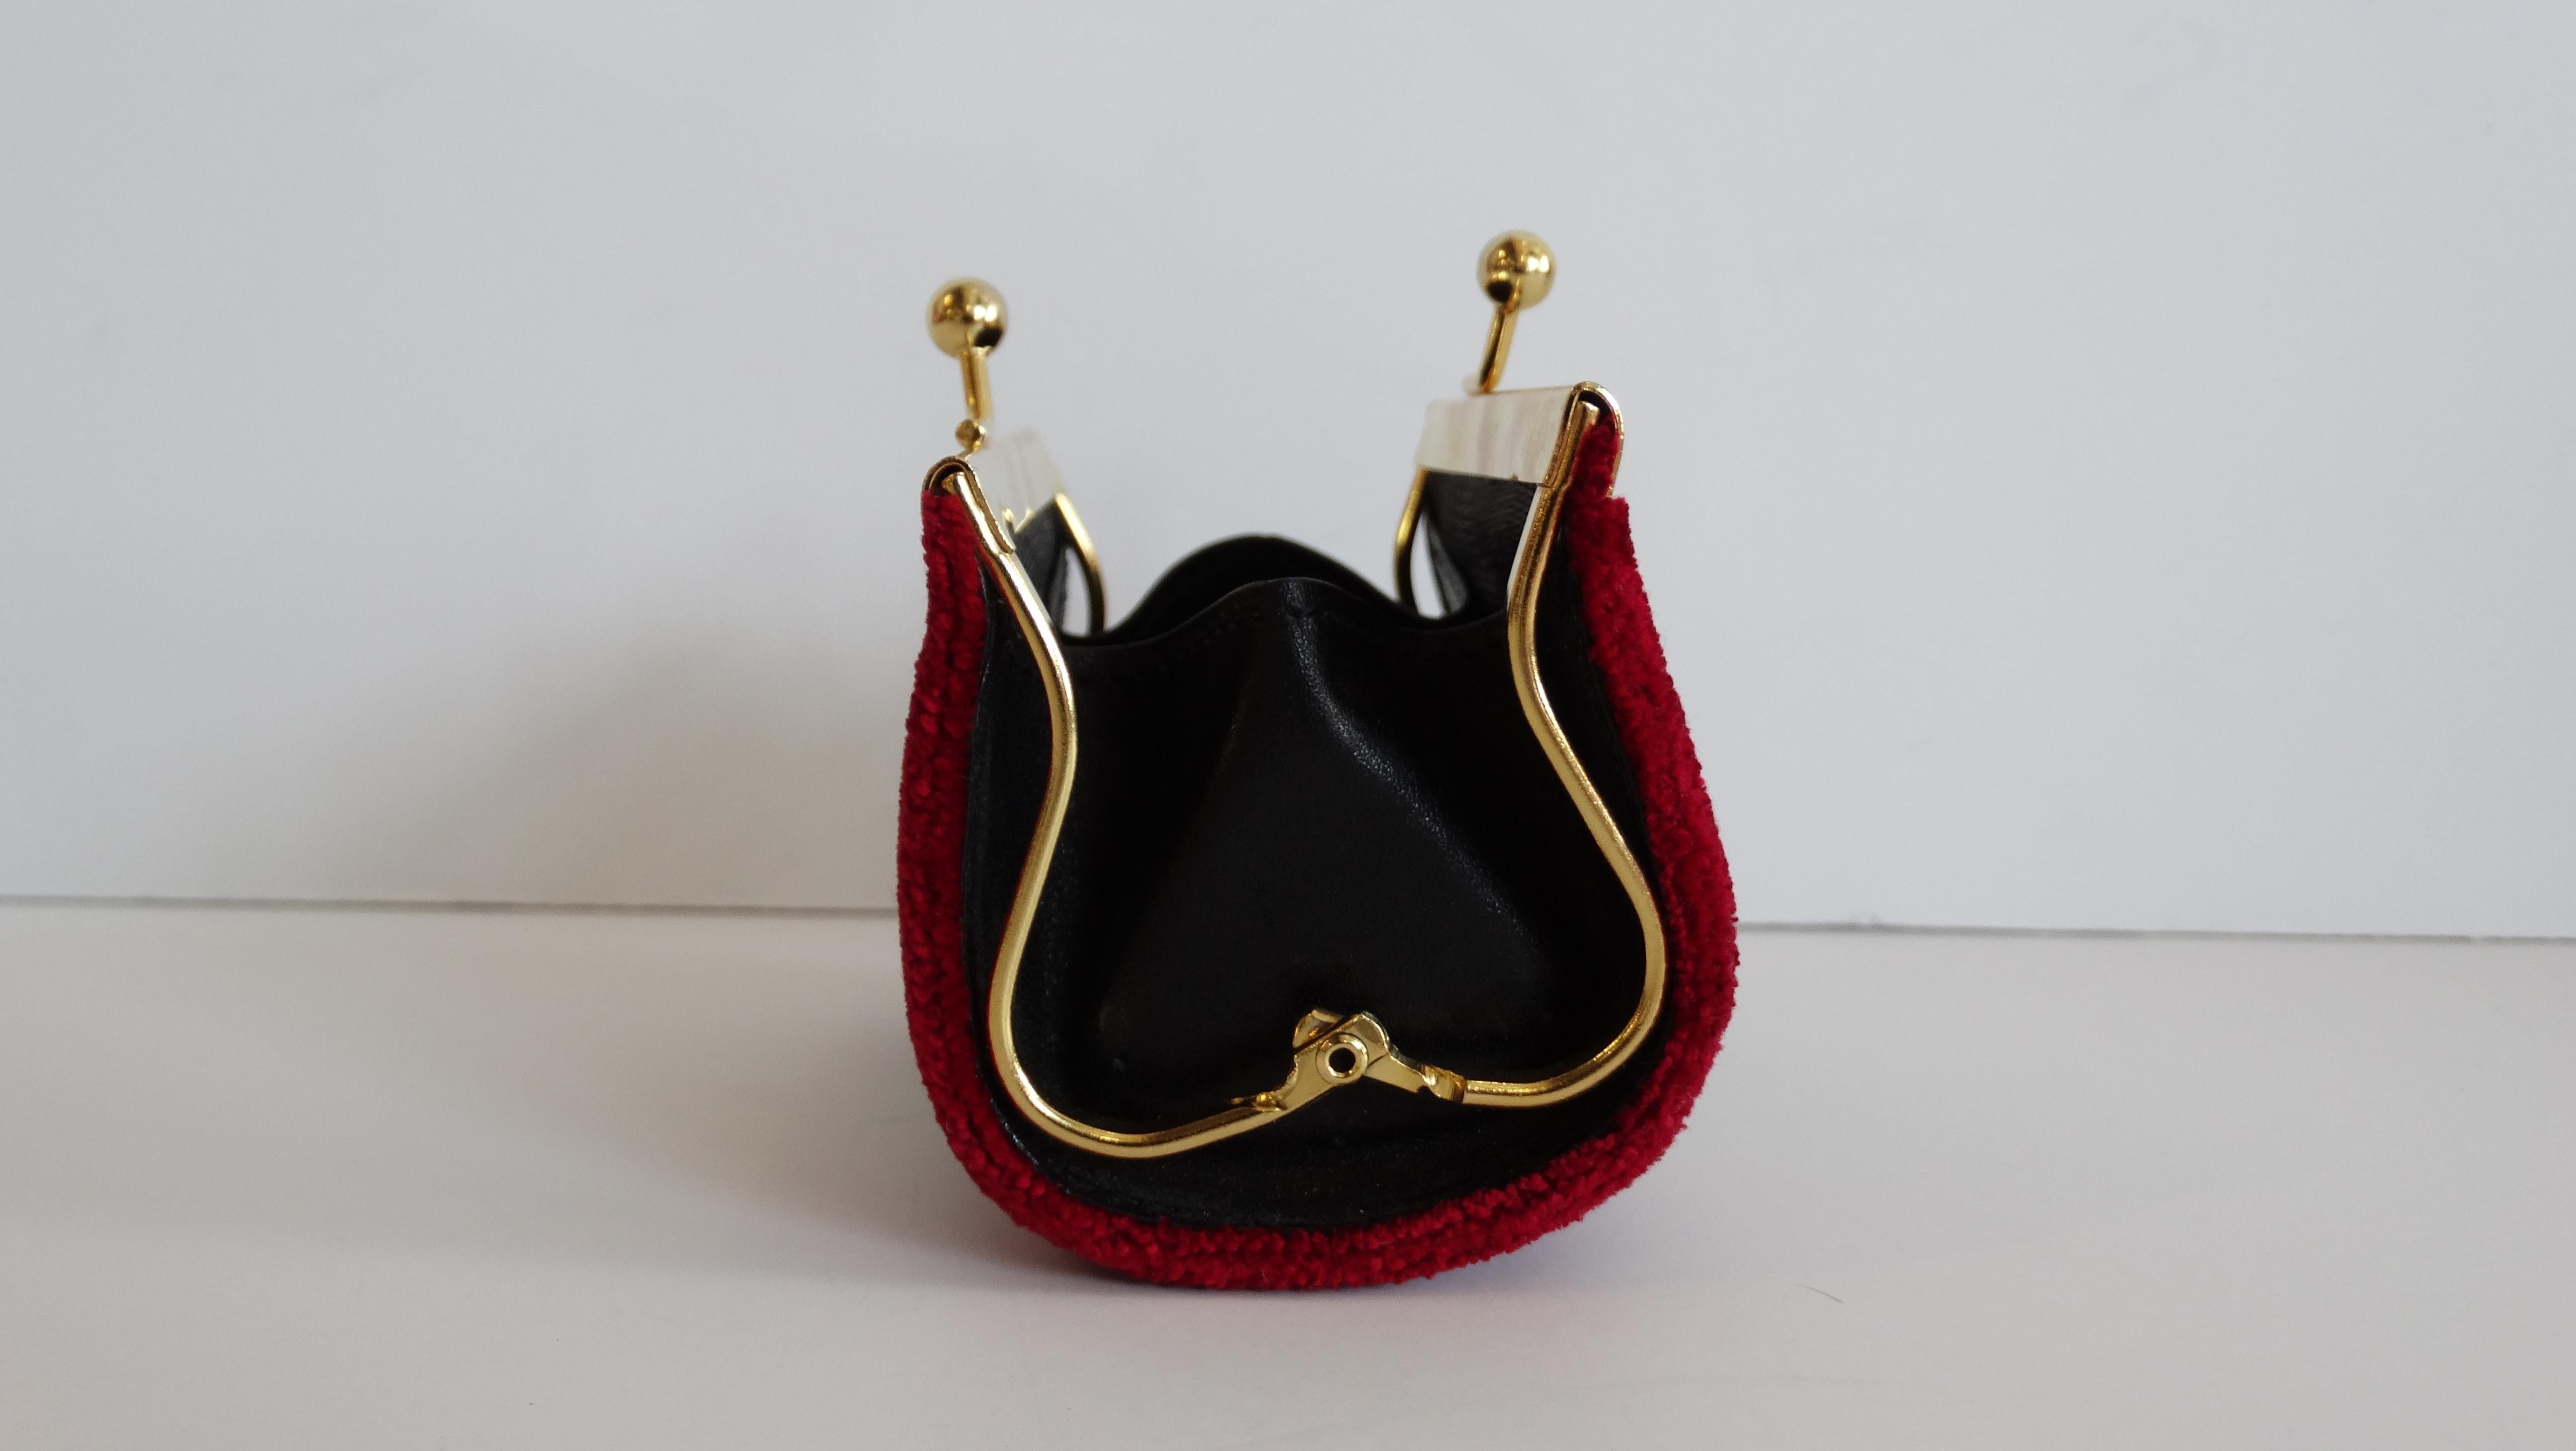 Vintage Roberta Di Camerino coin purse! Giuliana Camerino, the lines designer- was known for her incredible rich fabrics- this coin purse is no exception! Made of a thick carpet like velvet in shades of red and green with a buckle style design in